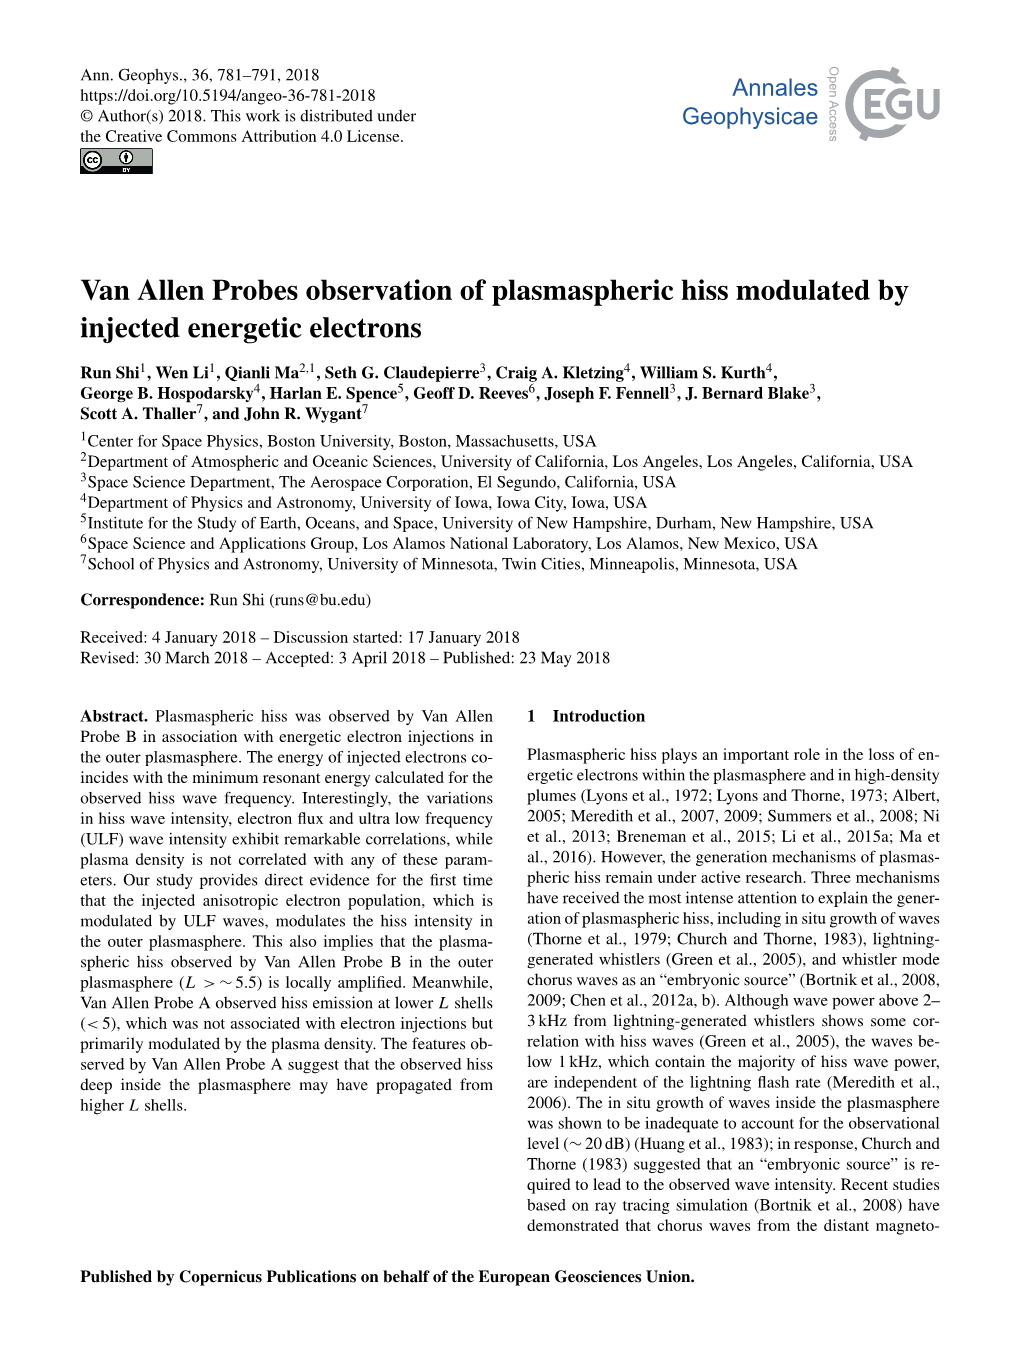 Van Allen Probes Observation of Plasmaspheric Hiss Modulated by Injected Energetic Electrons